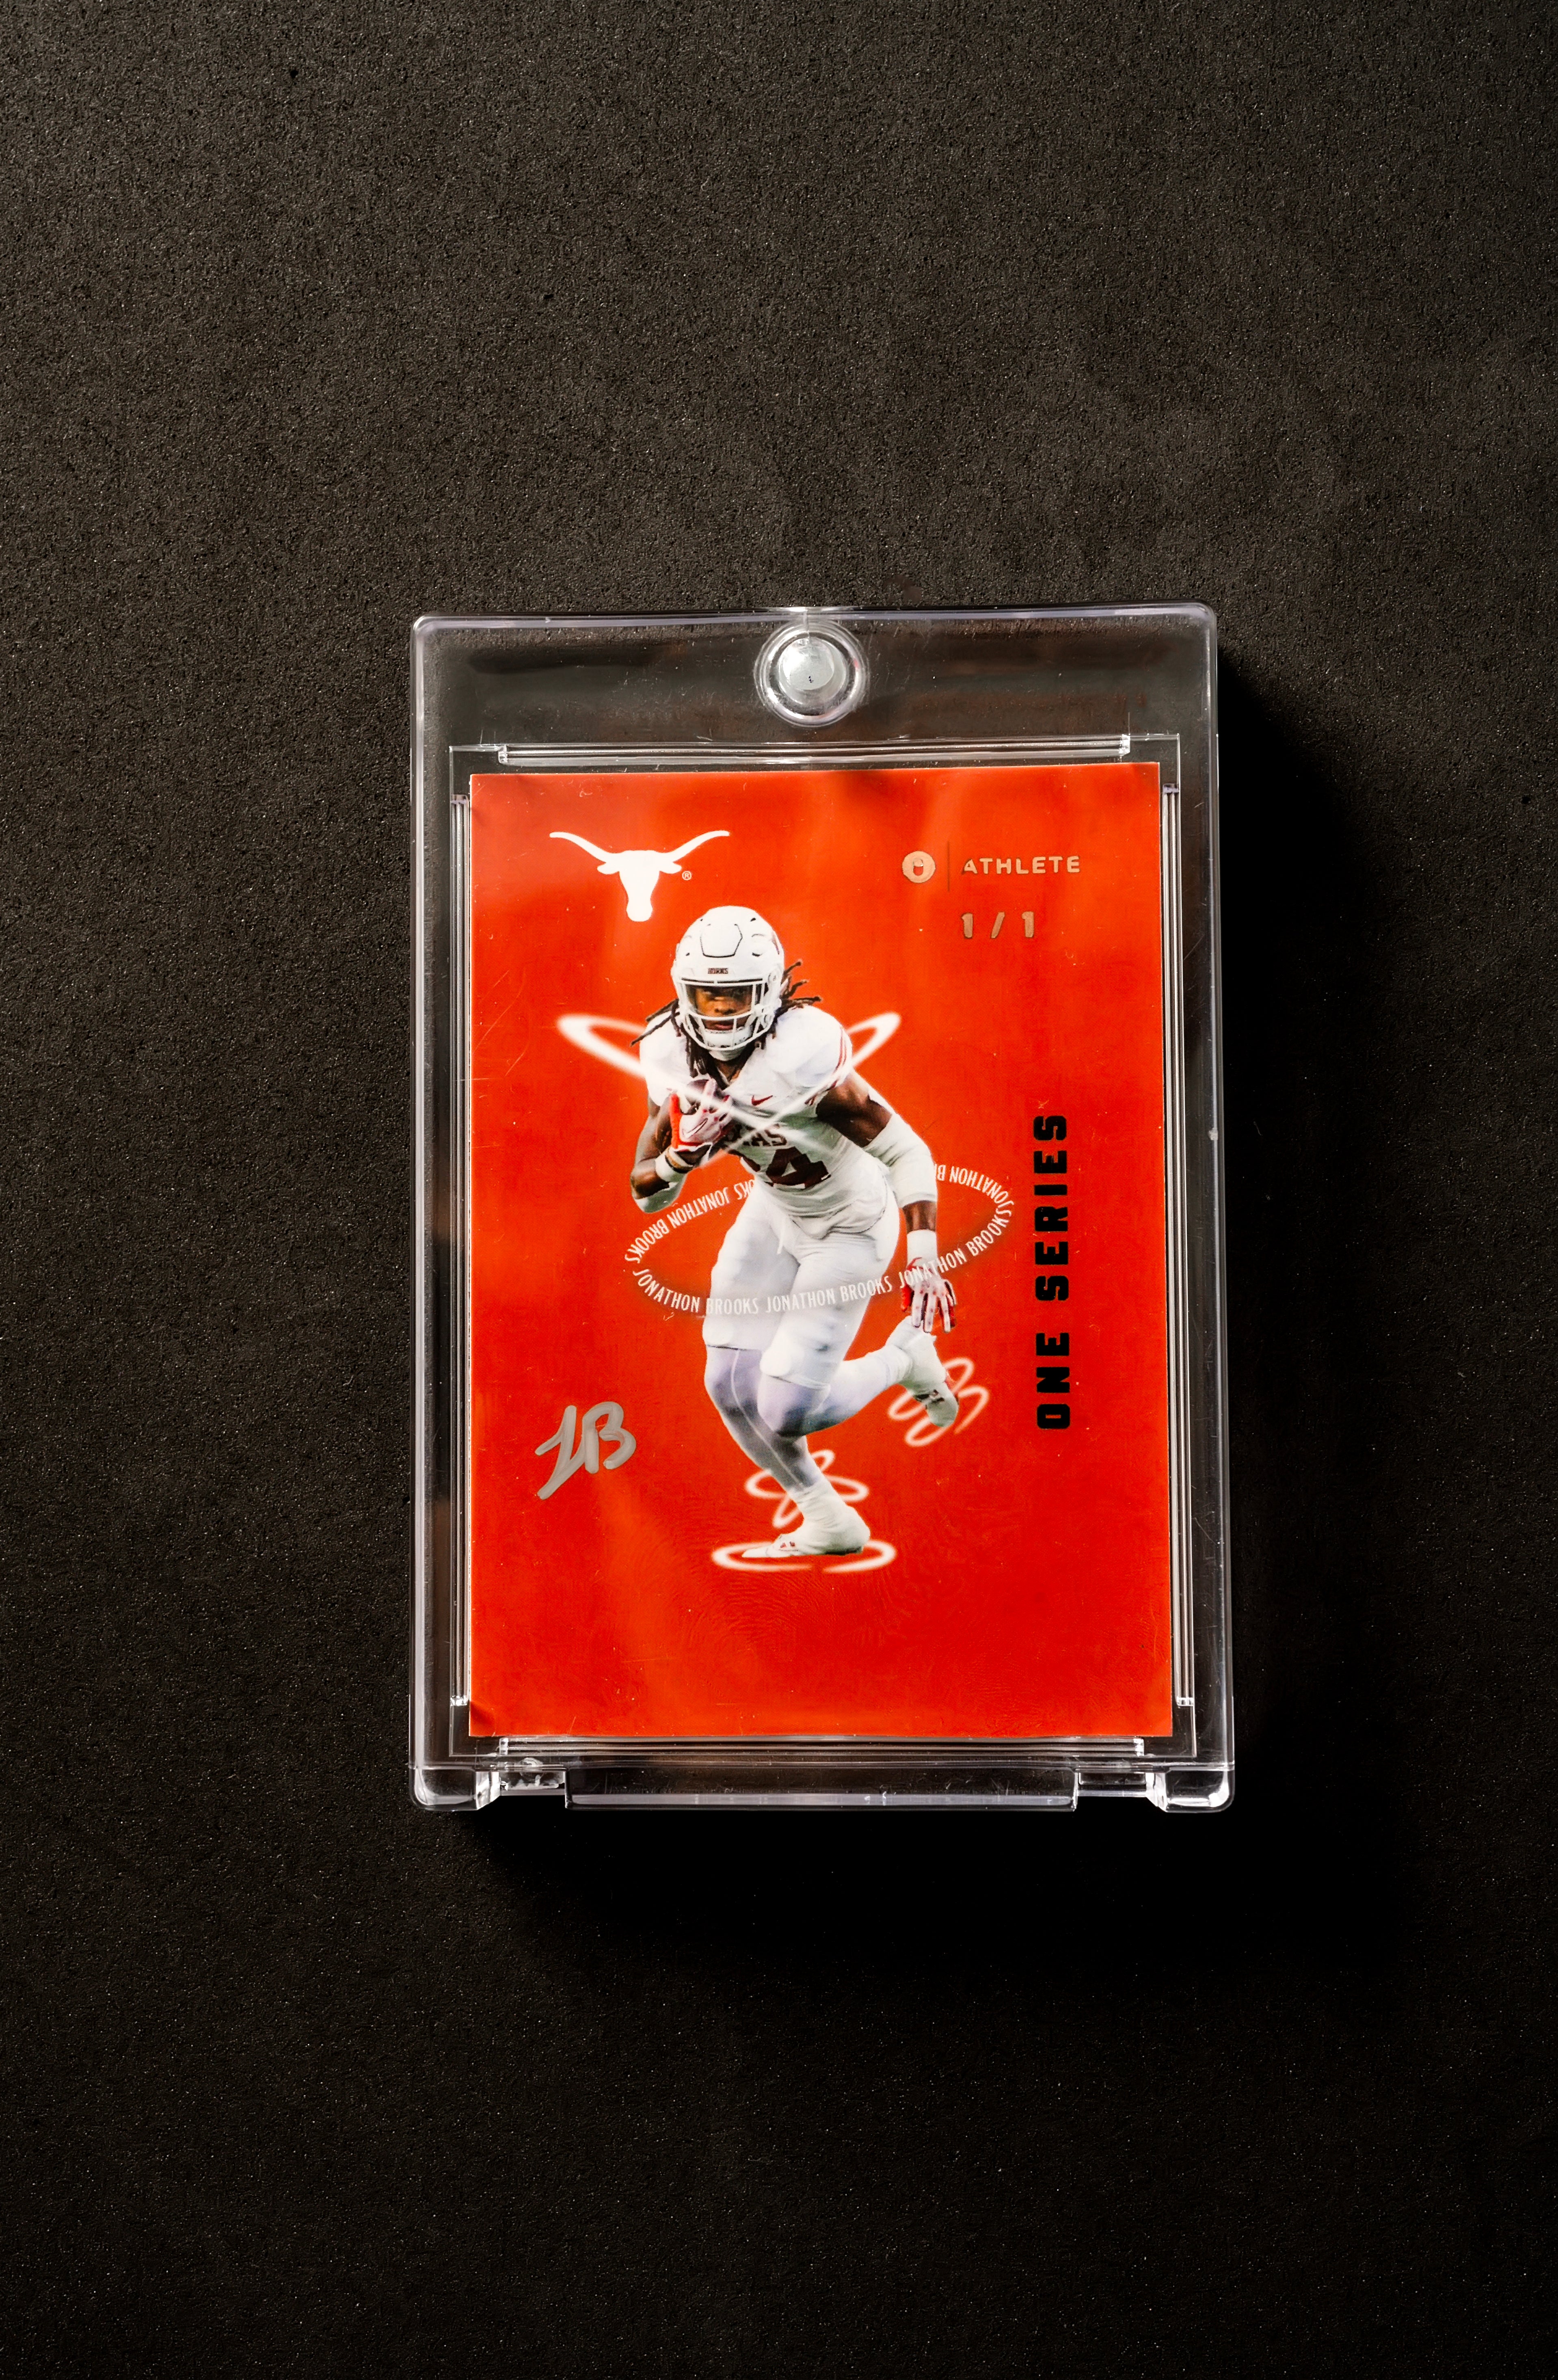 The University of Texas® NIL Football - 2023 Trading Cards - Single Pack